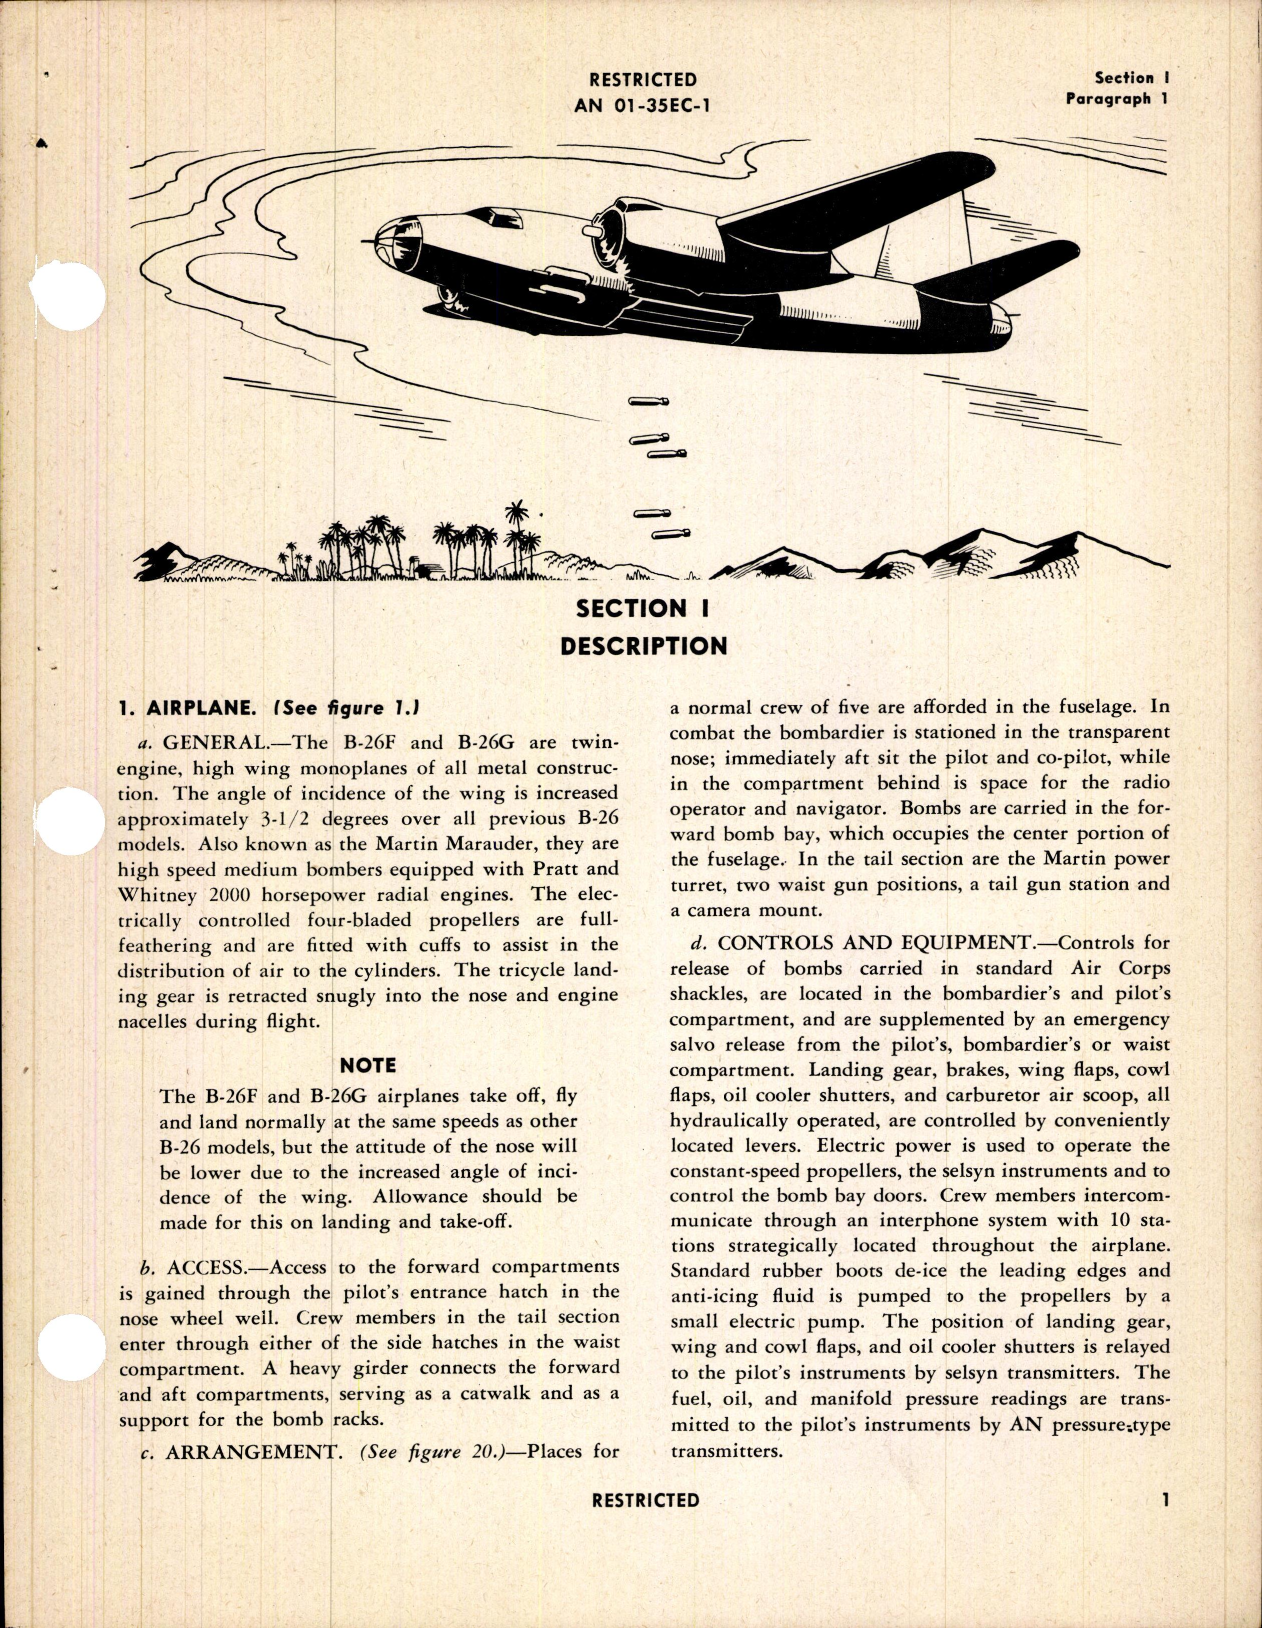 Sample page 5 from AirCorps Library document: Pilot's Flight Operating Instructions for B-26F and B-26G Airplanes